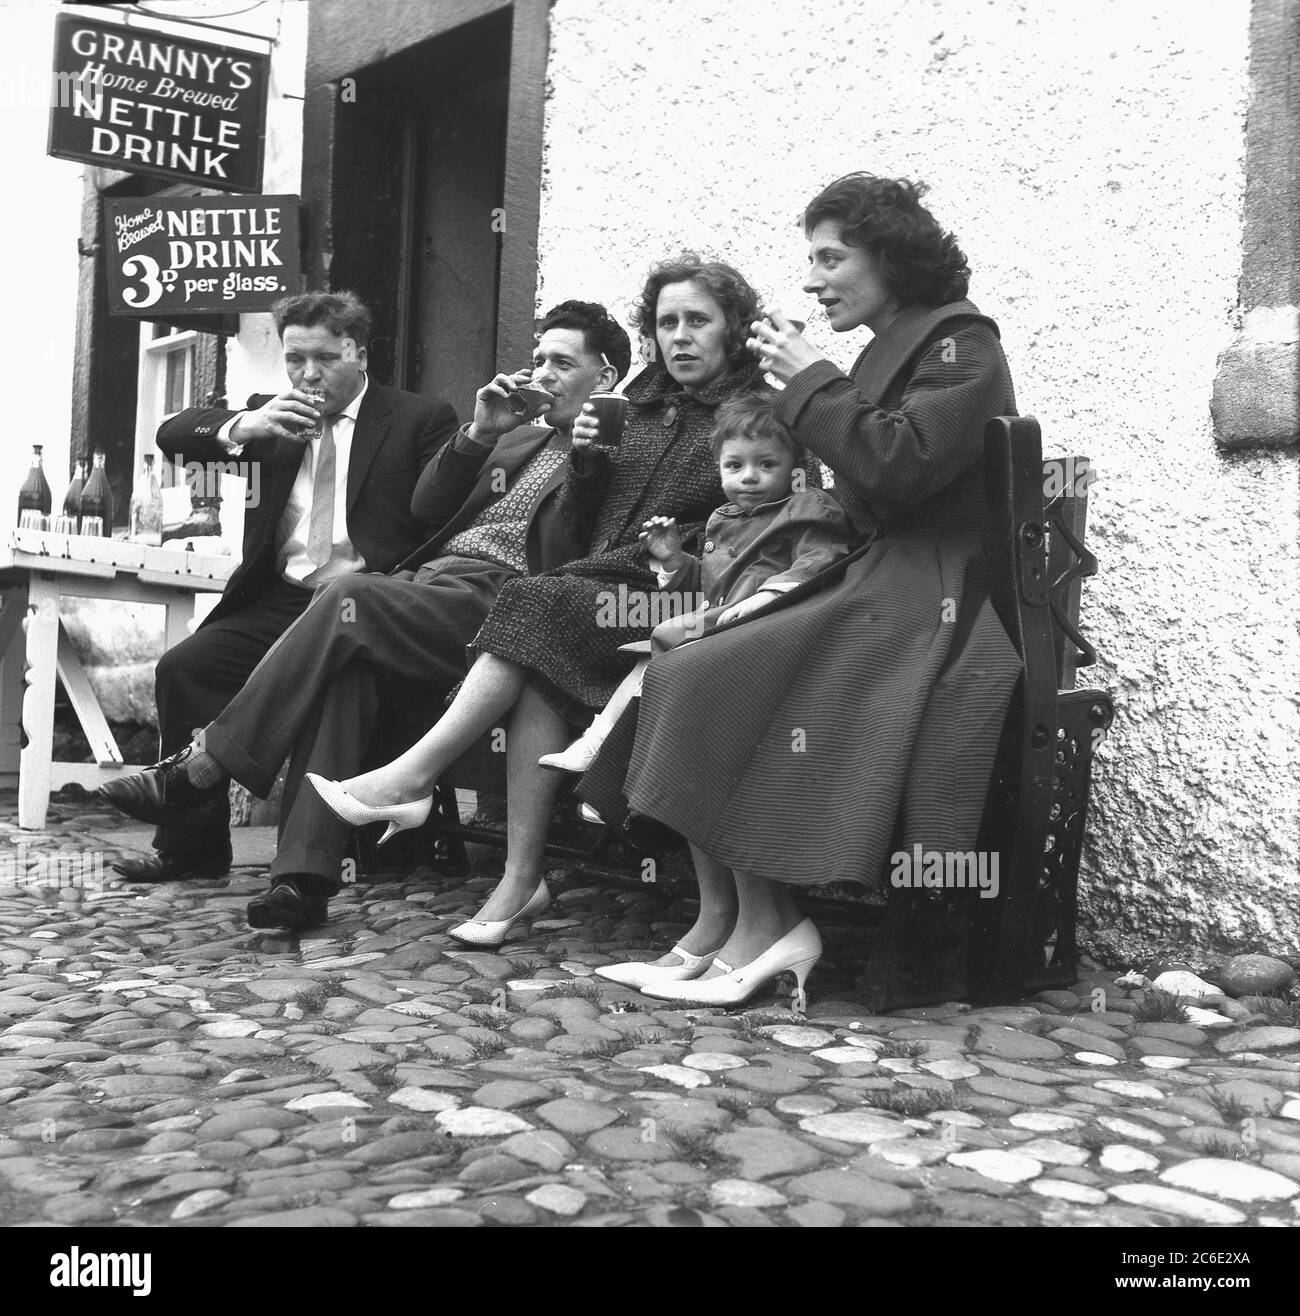 1950s, historical, sitting outside a cottage on a cobbled street at Heysham, Lancashire, England, UK, two men and women drinking 'Granny's Home Brewed Nettle Drink' at 3d per glass. Made from herbal extracts, sugar, yeast, lemons and nettles, the home brew, said to have several health benefits, was made by a local well-known figure in the seaside village, Granny Hutchinson. Stock Photo